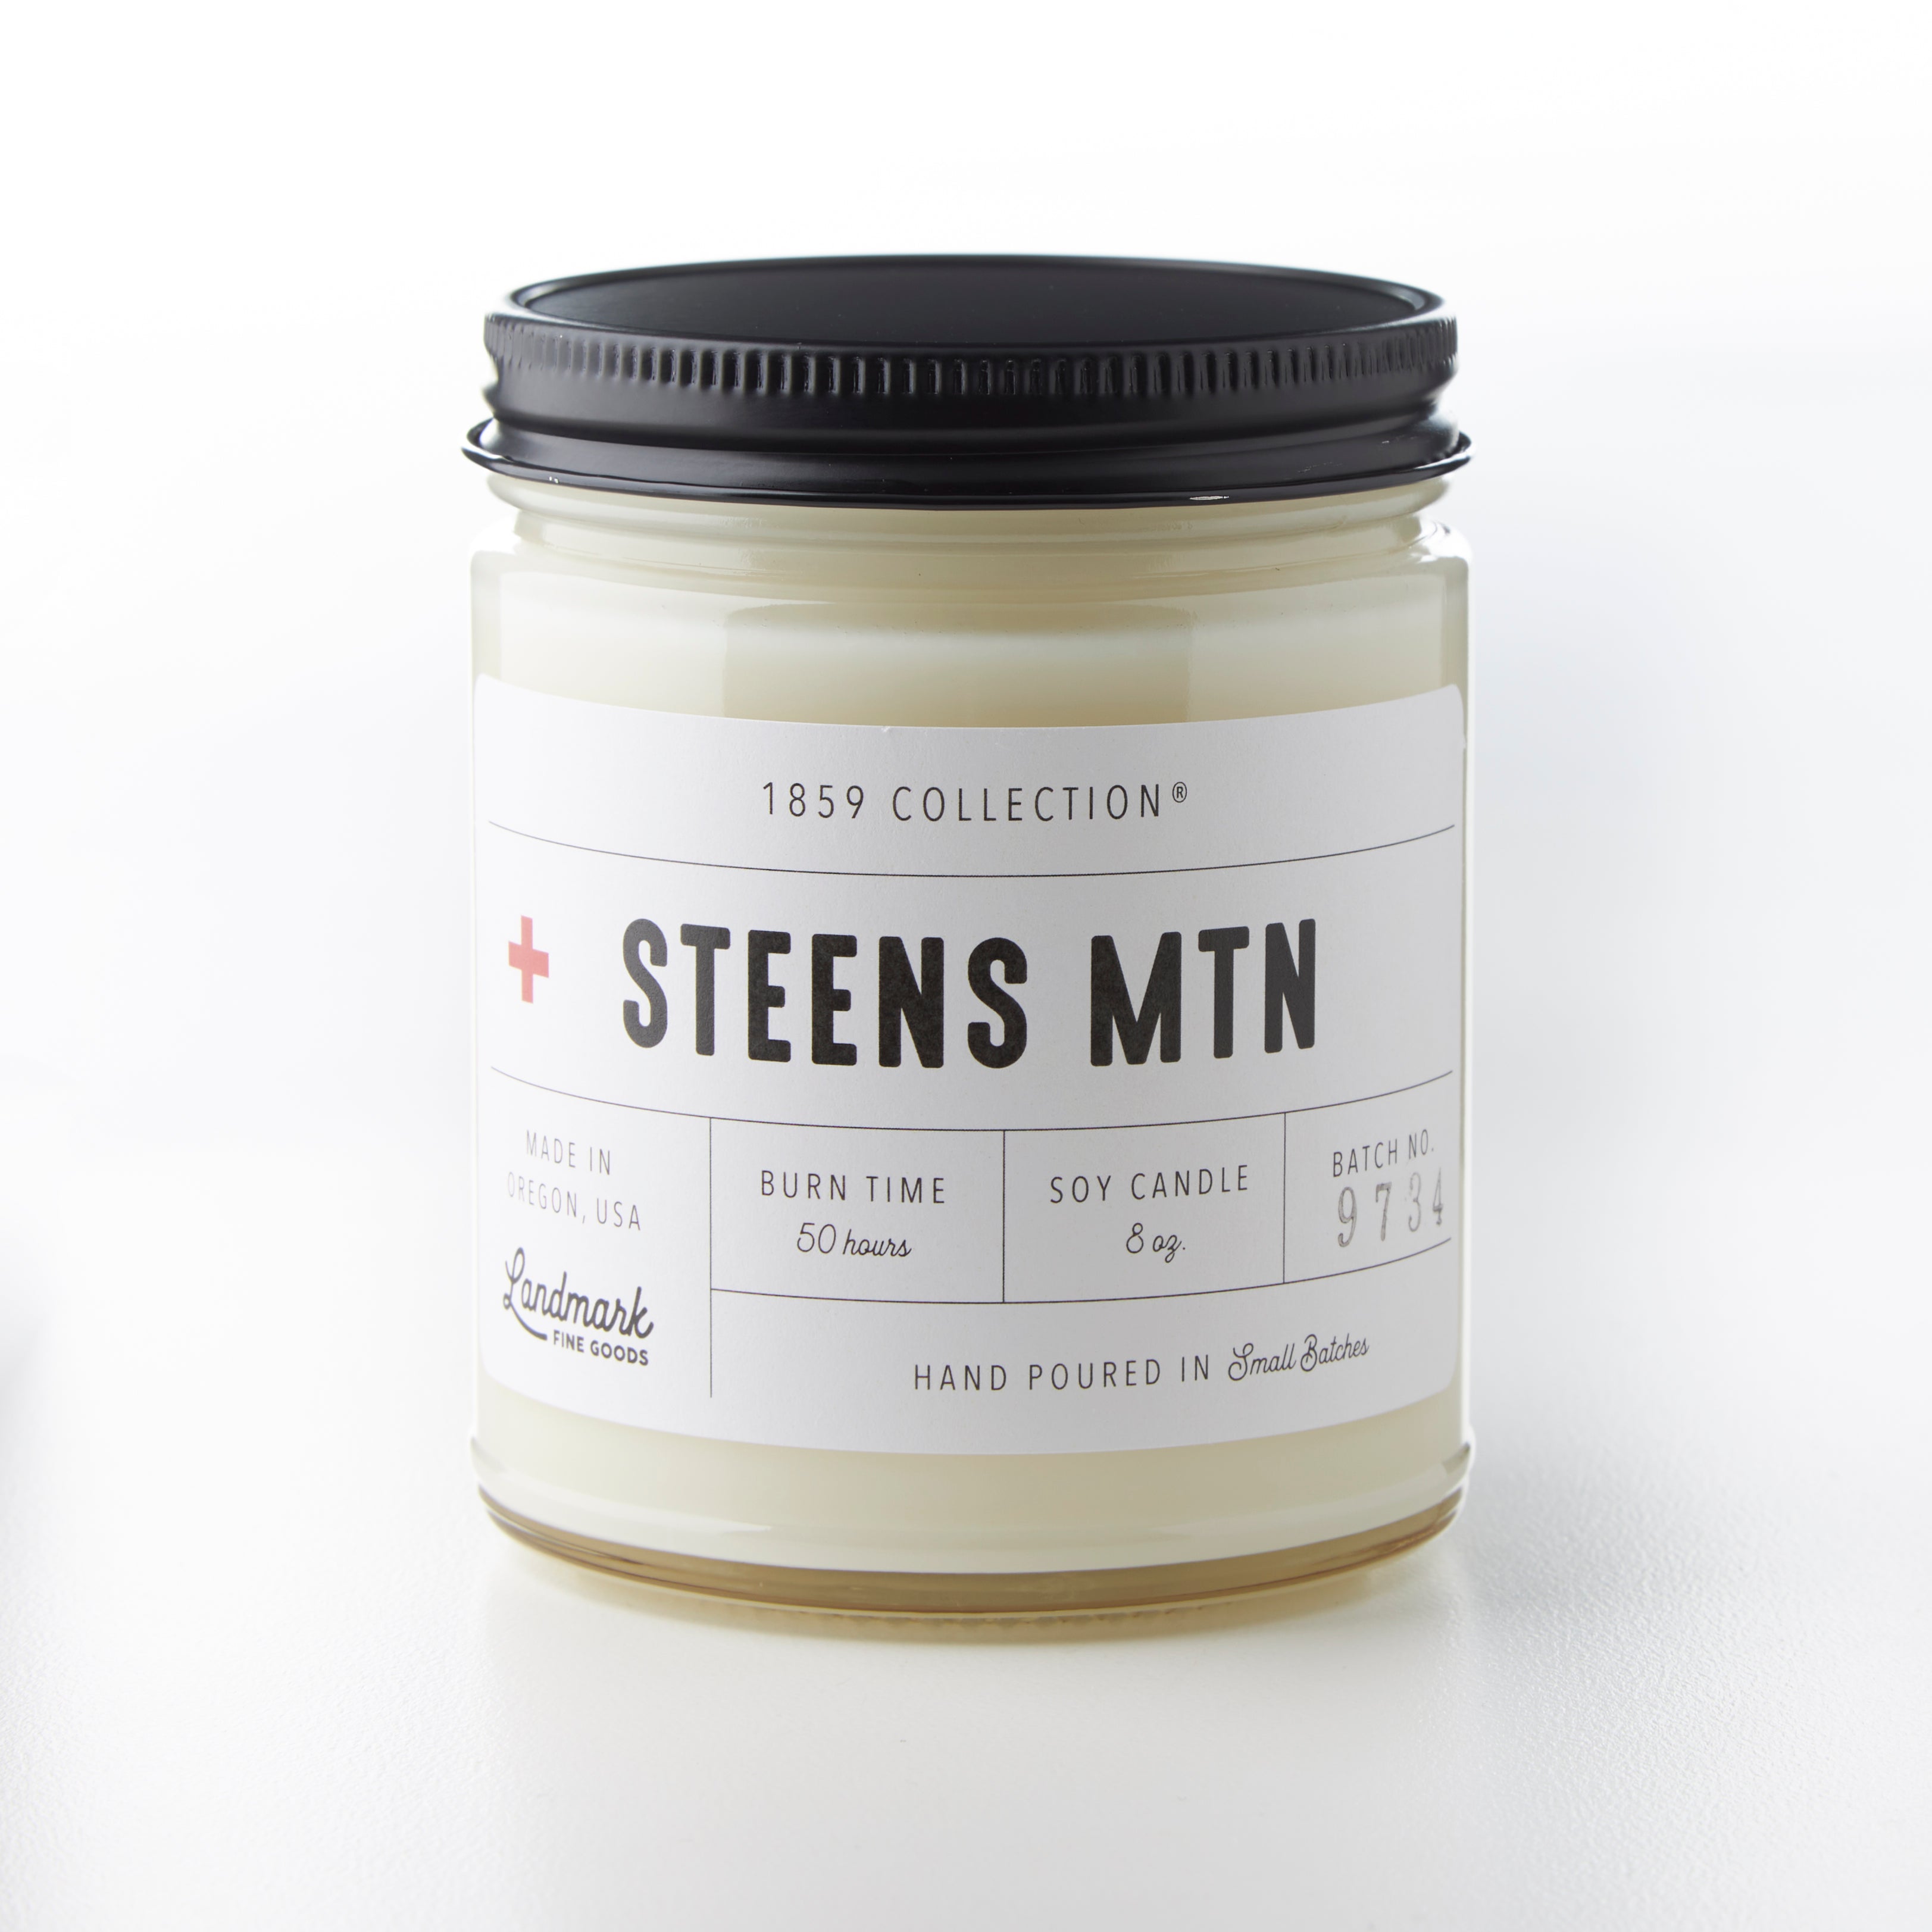 Steens Mtn Candle - 1859 Collection®